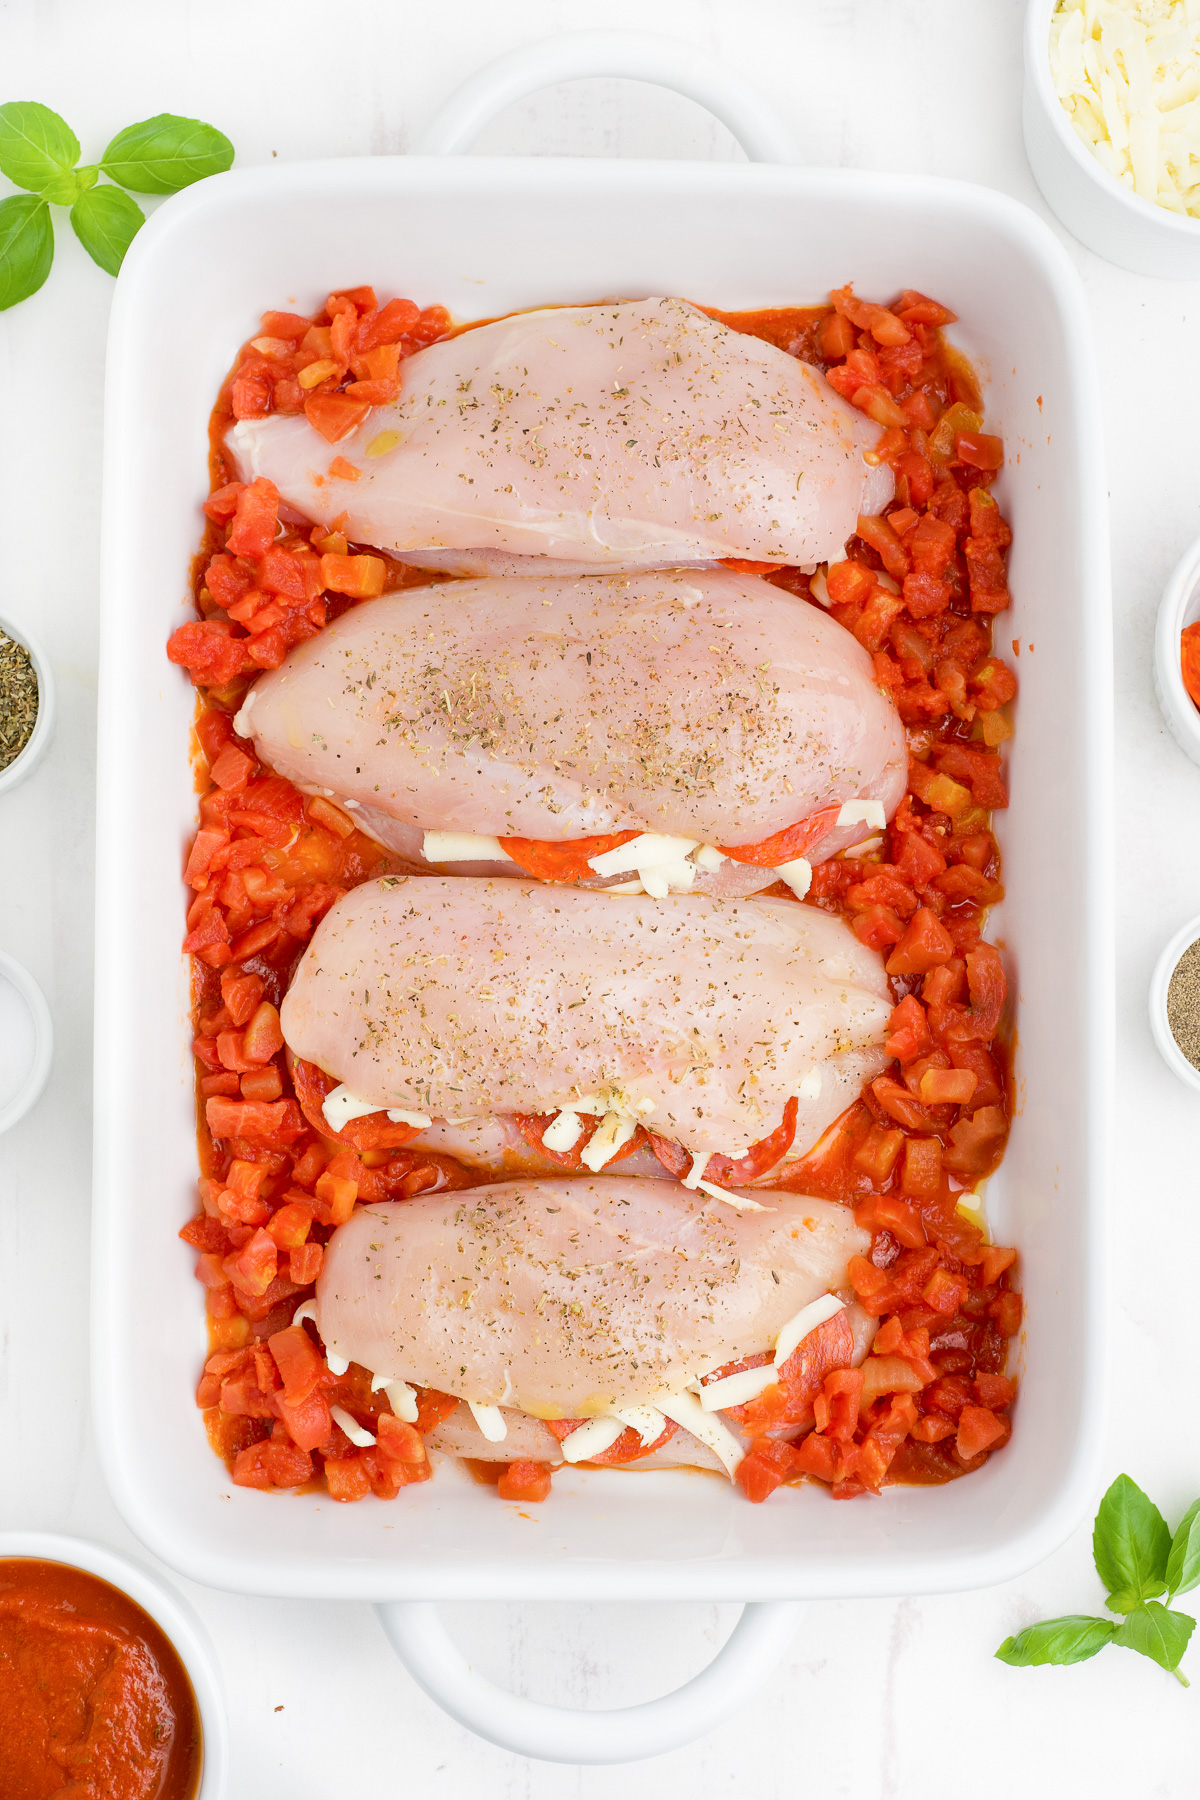 Chicken breasts stuffed with cheese and pepperoni surrounded by diced tomatoes in a baking dish from overhead.